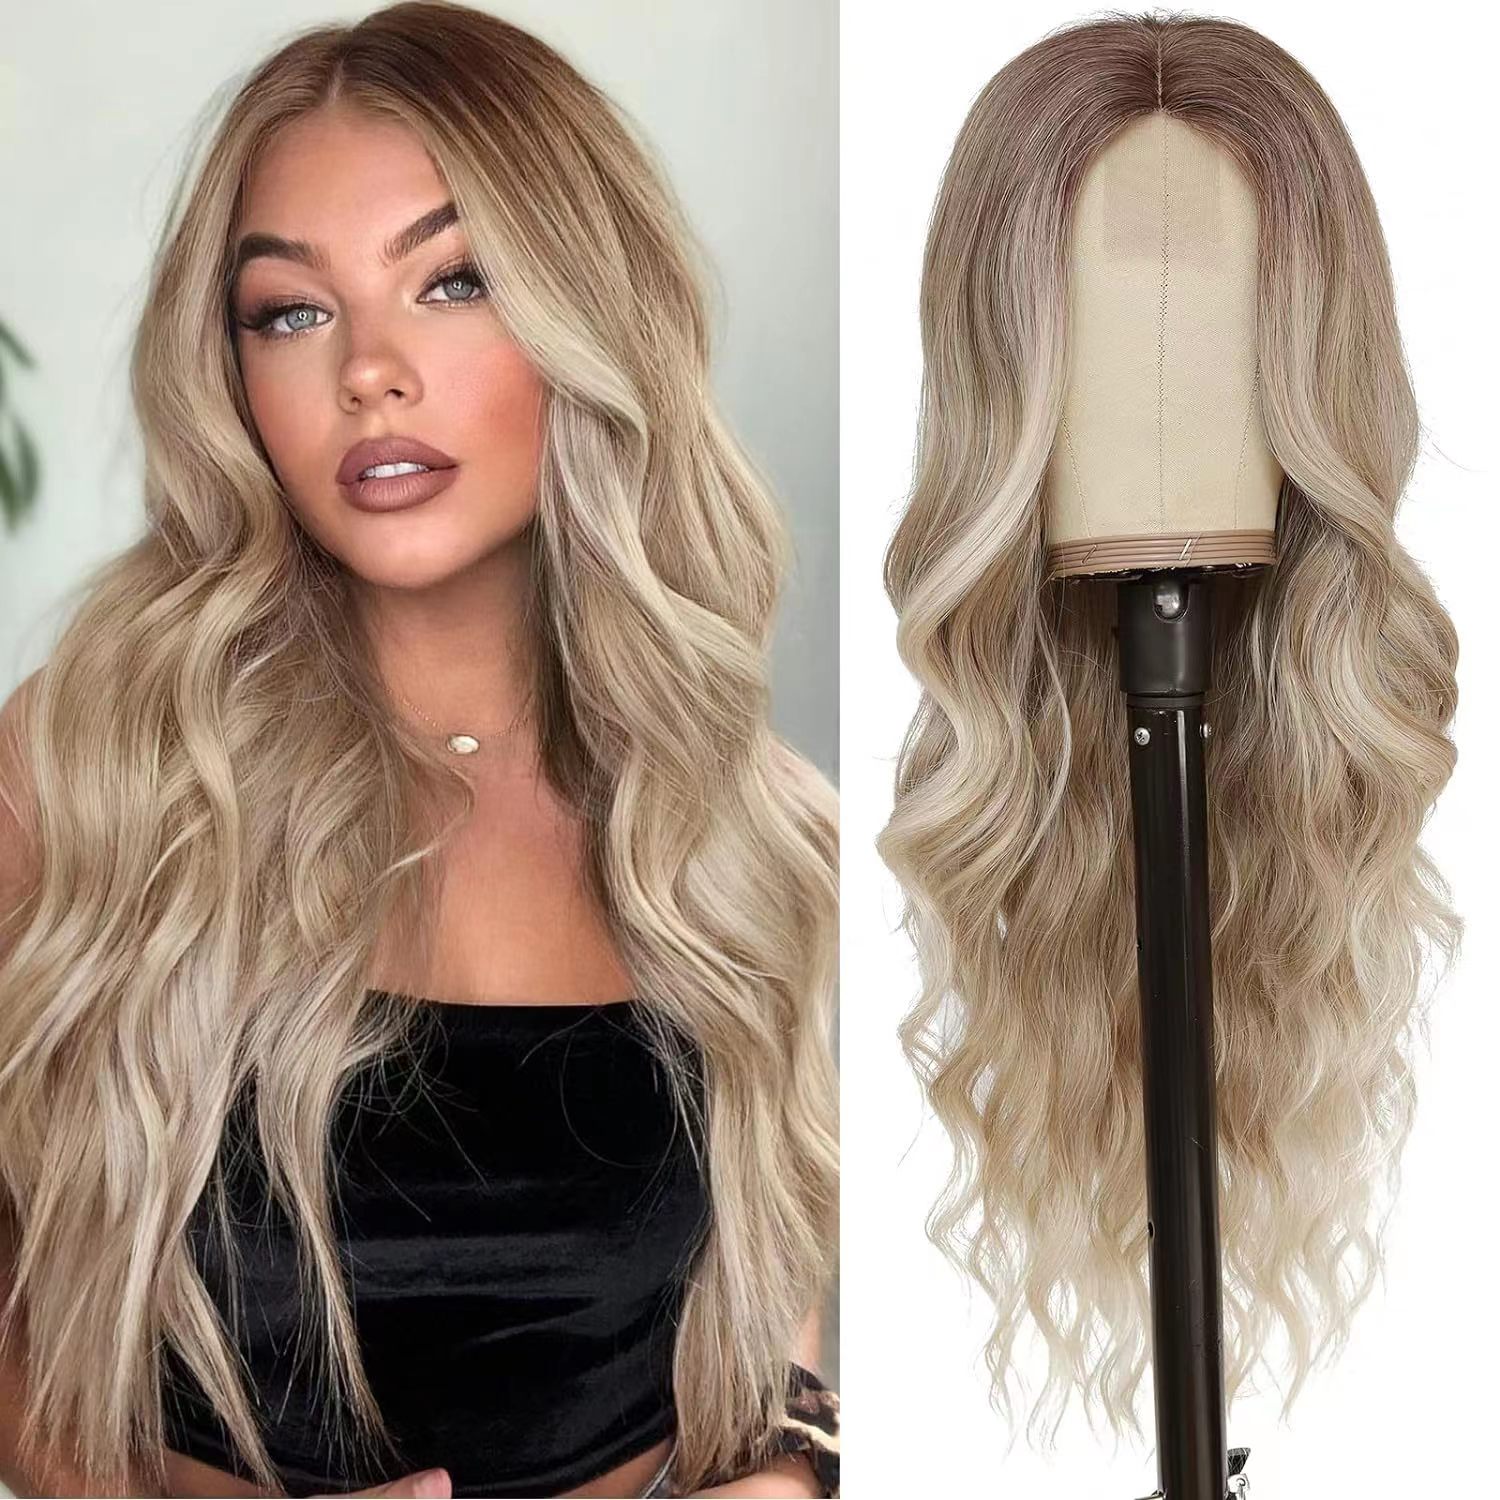 New arrival Long Human Hair Wigs Lace Front Wigs Brazilian Body Wave Deep Wave Water Wave Lace Closure Wig Straight Bob Wigs Pre Plucked